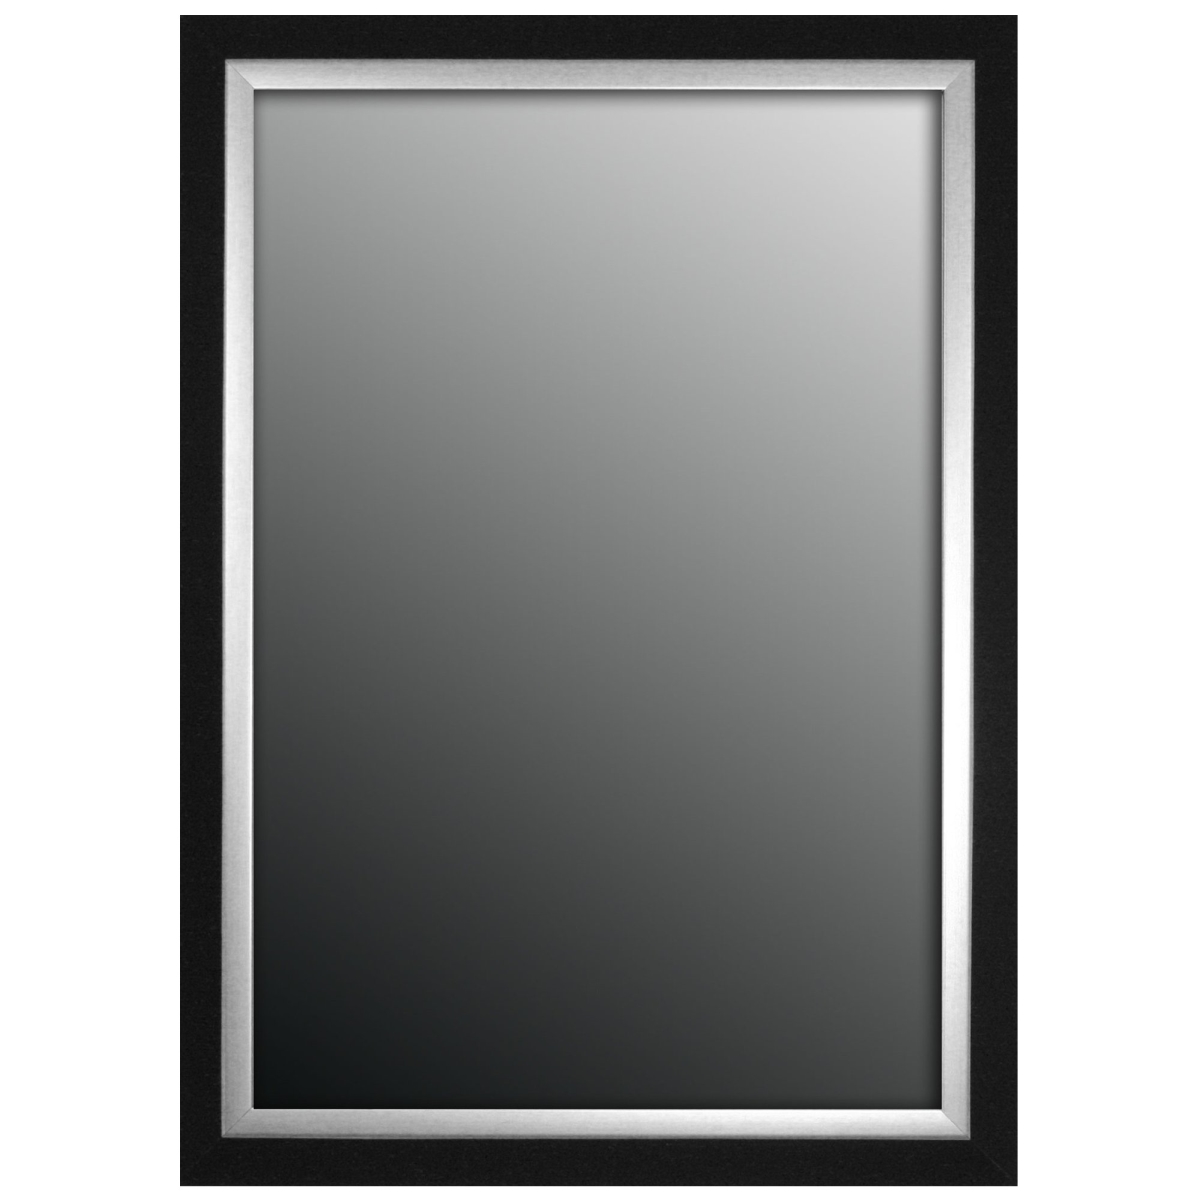 Hitchcock Butterfield 807500 Black & Brushed Nickel Silver Montevideo Natural Wall Mirror - 25.75 X 35.75 In.